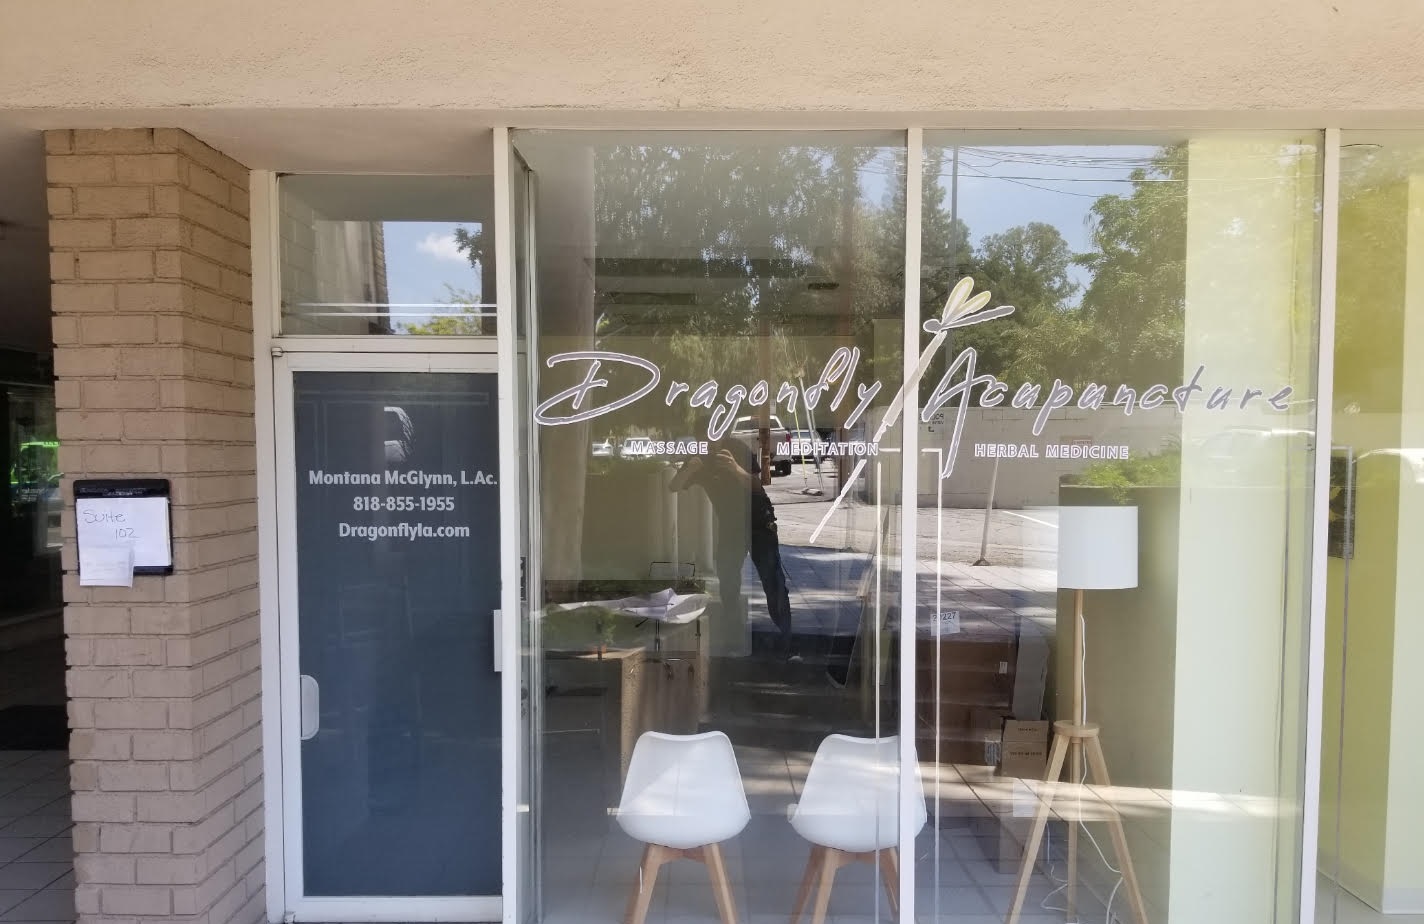 You are currently viewing Window Graphics for Dragonfly Acupuncture in Encino